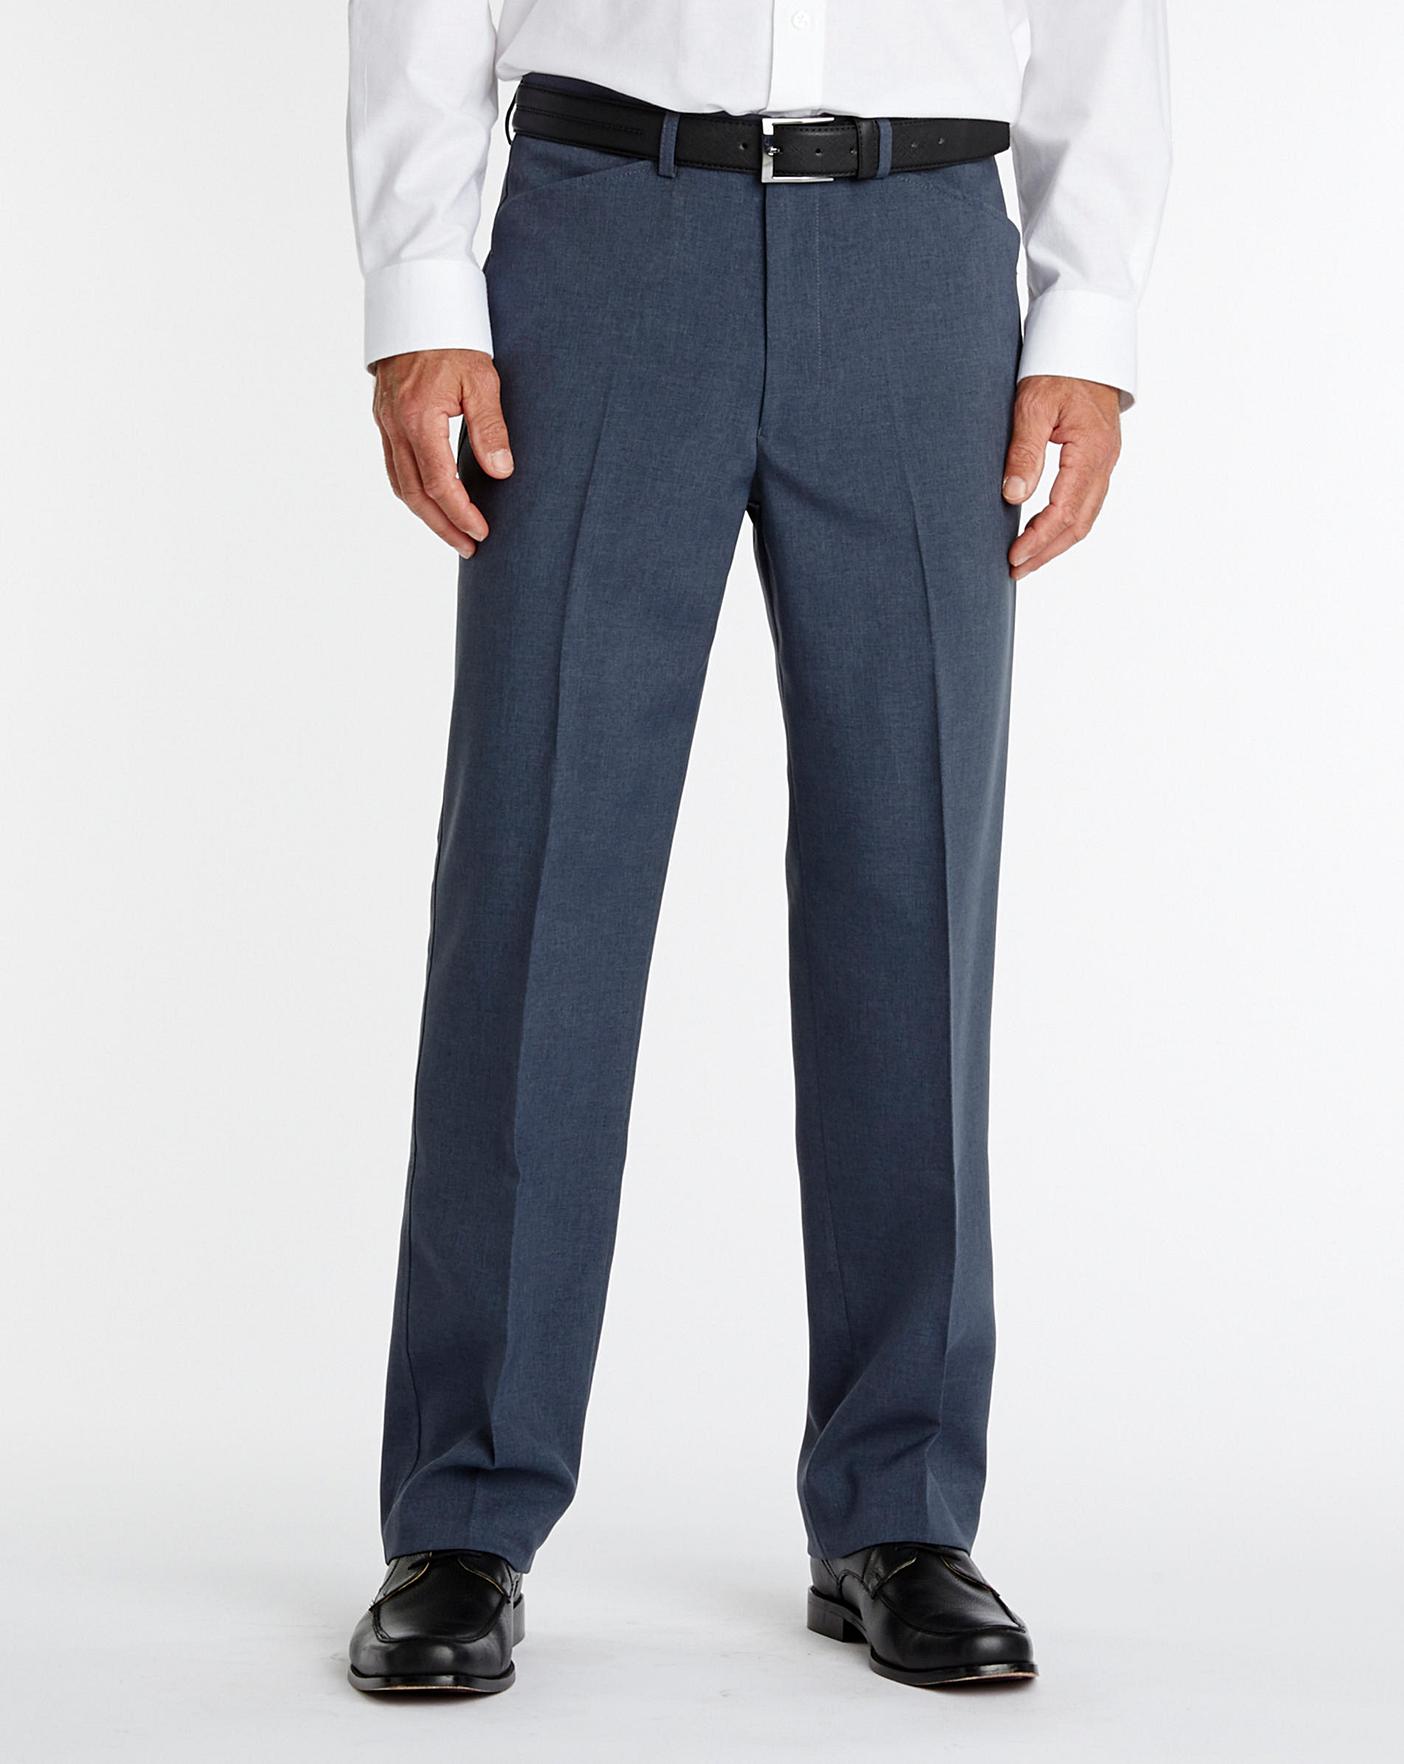 Farah Trousers 27in | Crazy Clearance